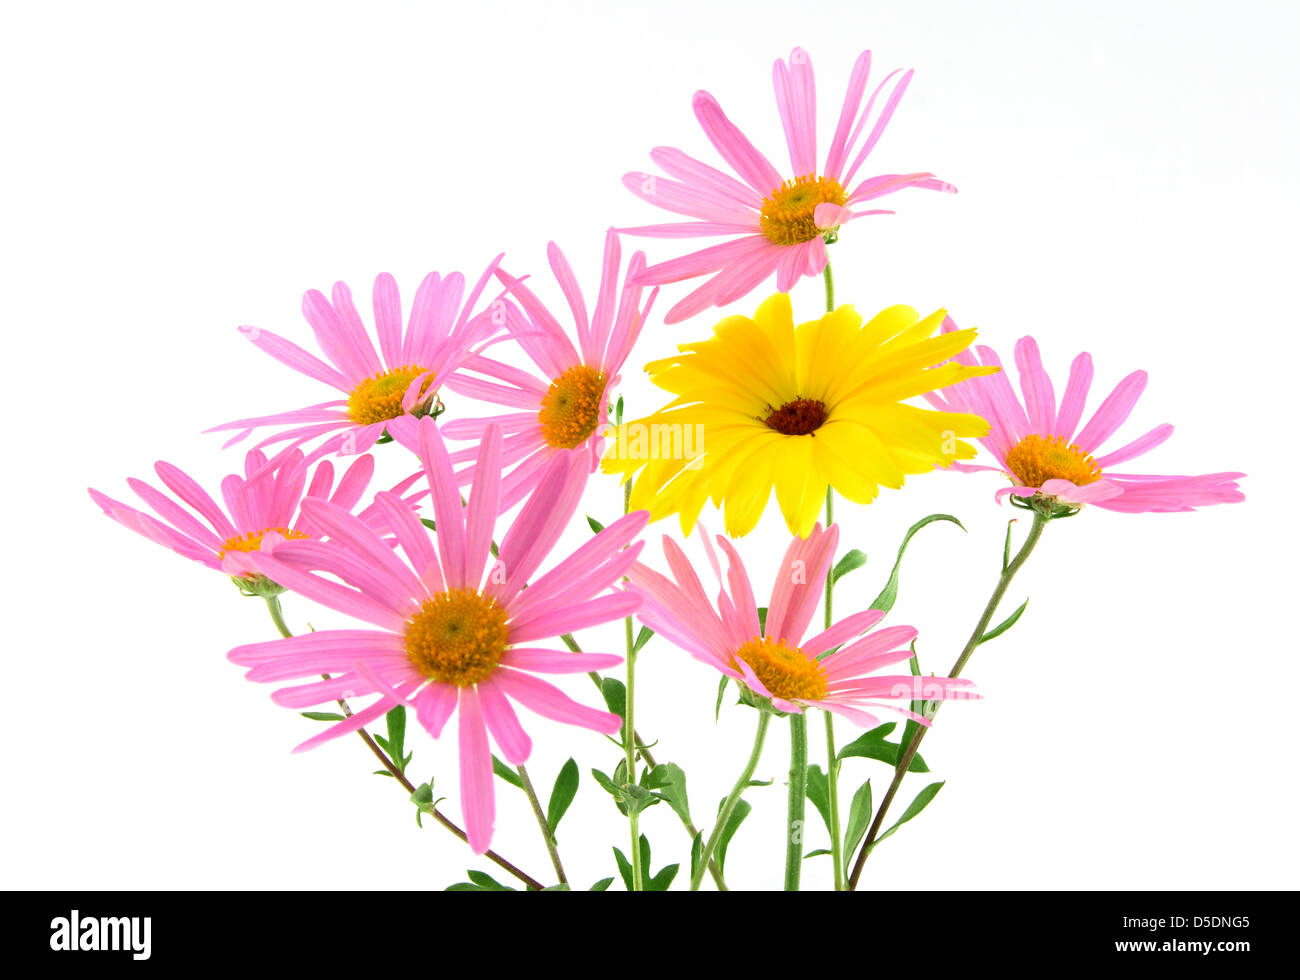 Bouquet of pink and yellow flowers on white background (gerbera daisies). Stock Photo